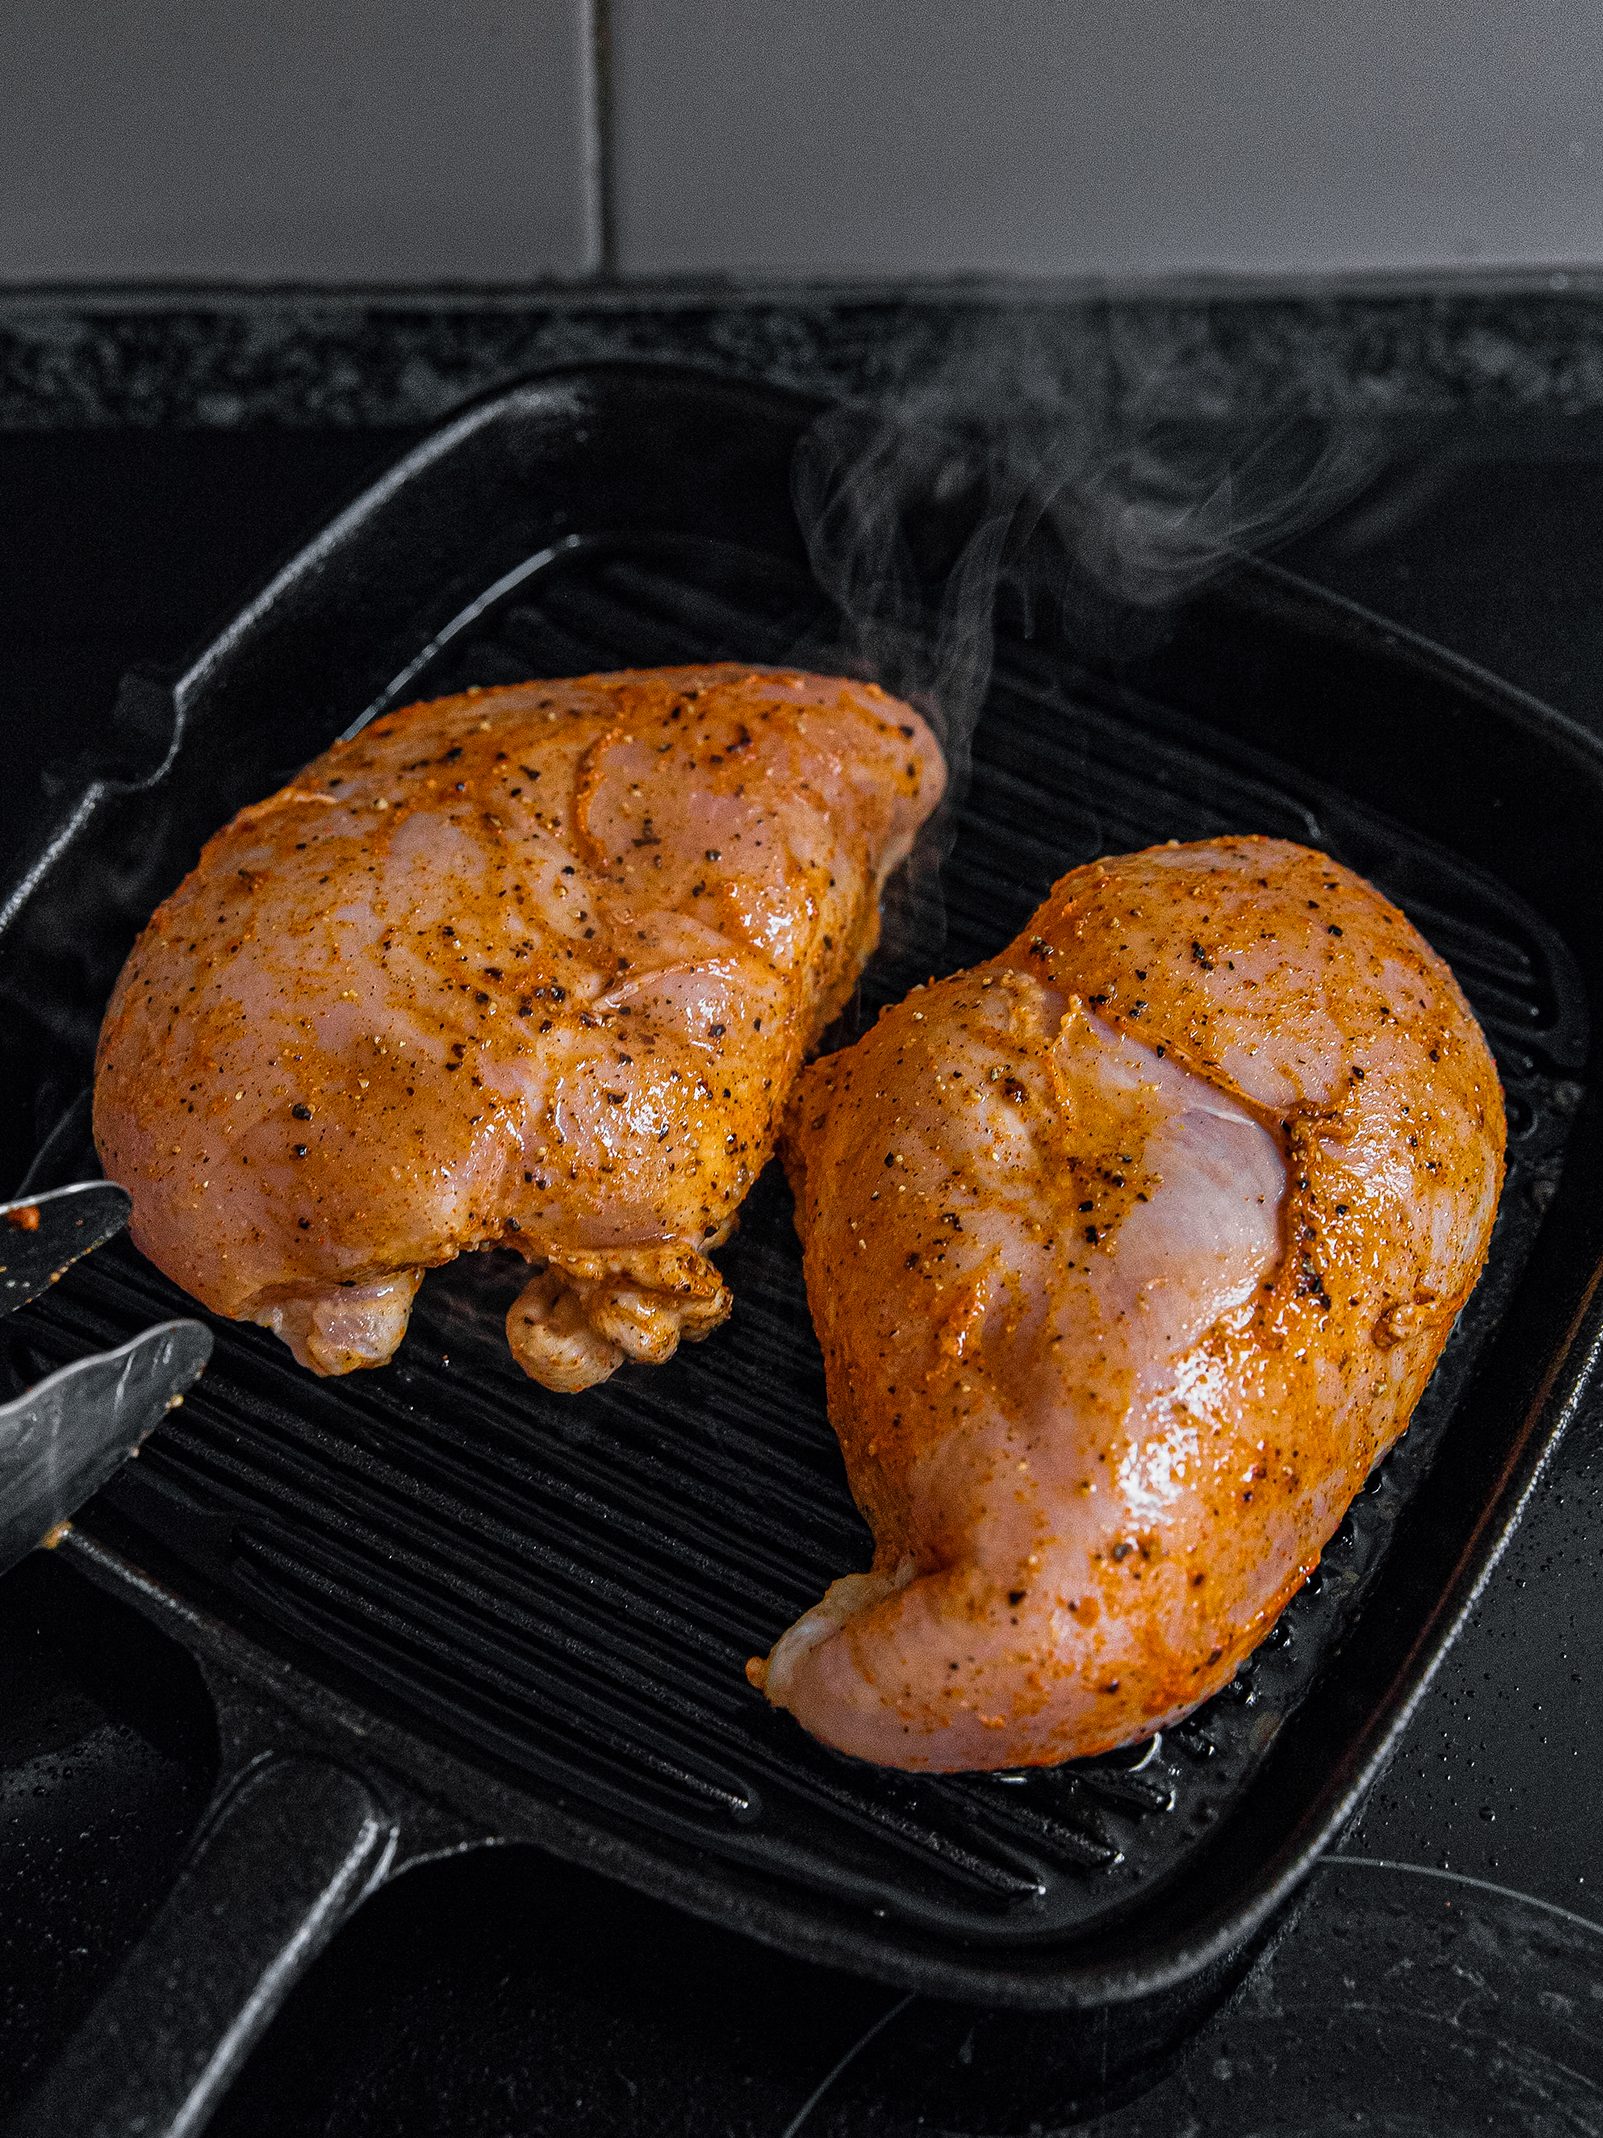 Preheat grill to medium heat. Place chicken on the grill and cook for around 5 - 6 minutes on each side, ensuring the internal temperature of the chicken reaches 165˚F. Cut into small pieces and set aside.